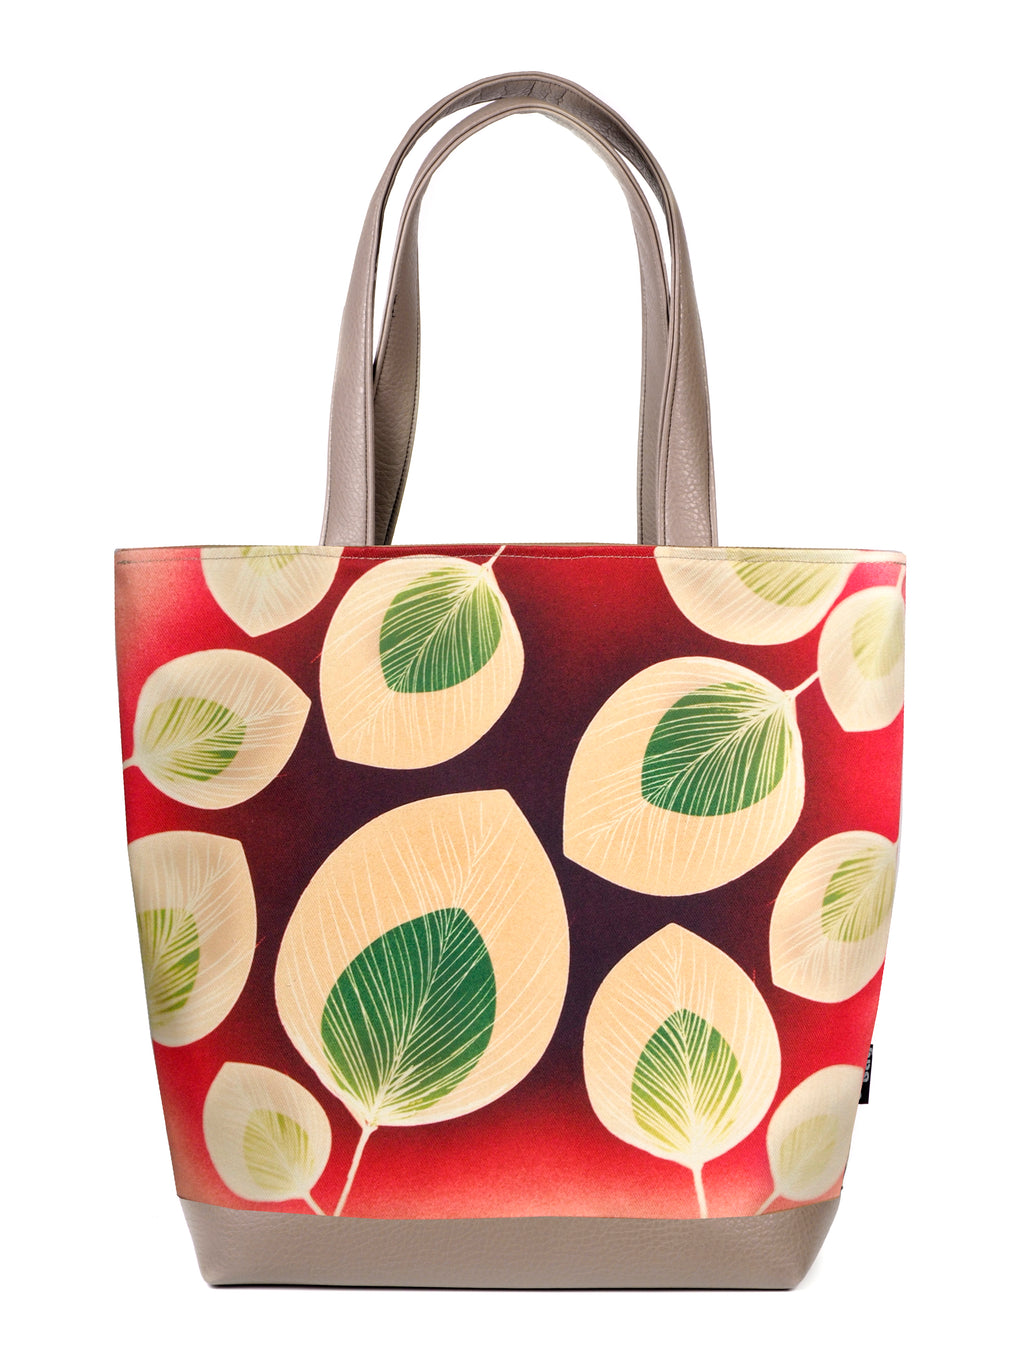 Bardo large tote bag - Rosily - Premium large tote bag from Bardo bag - Just lvabstract, art bag, black, floral, flower, geometric abstraction, gift, green, handemade, large, nature, pink, purple, red, tablet, tote bag, tulips, vegan leather, woman, work bag89.00! Shop now at BARDO ART WORKS